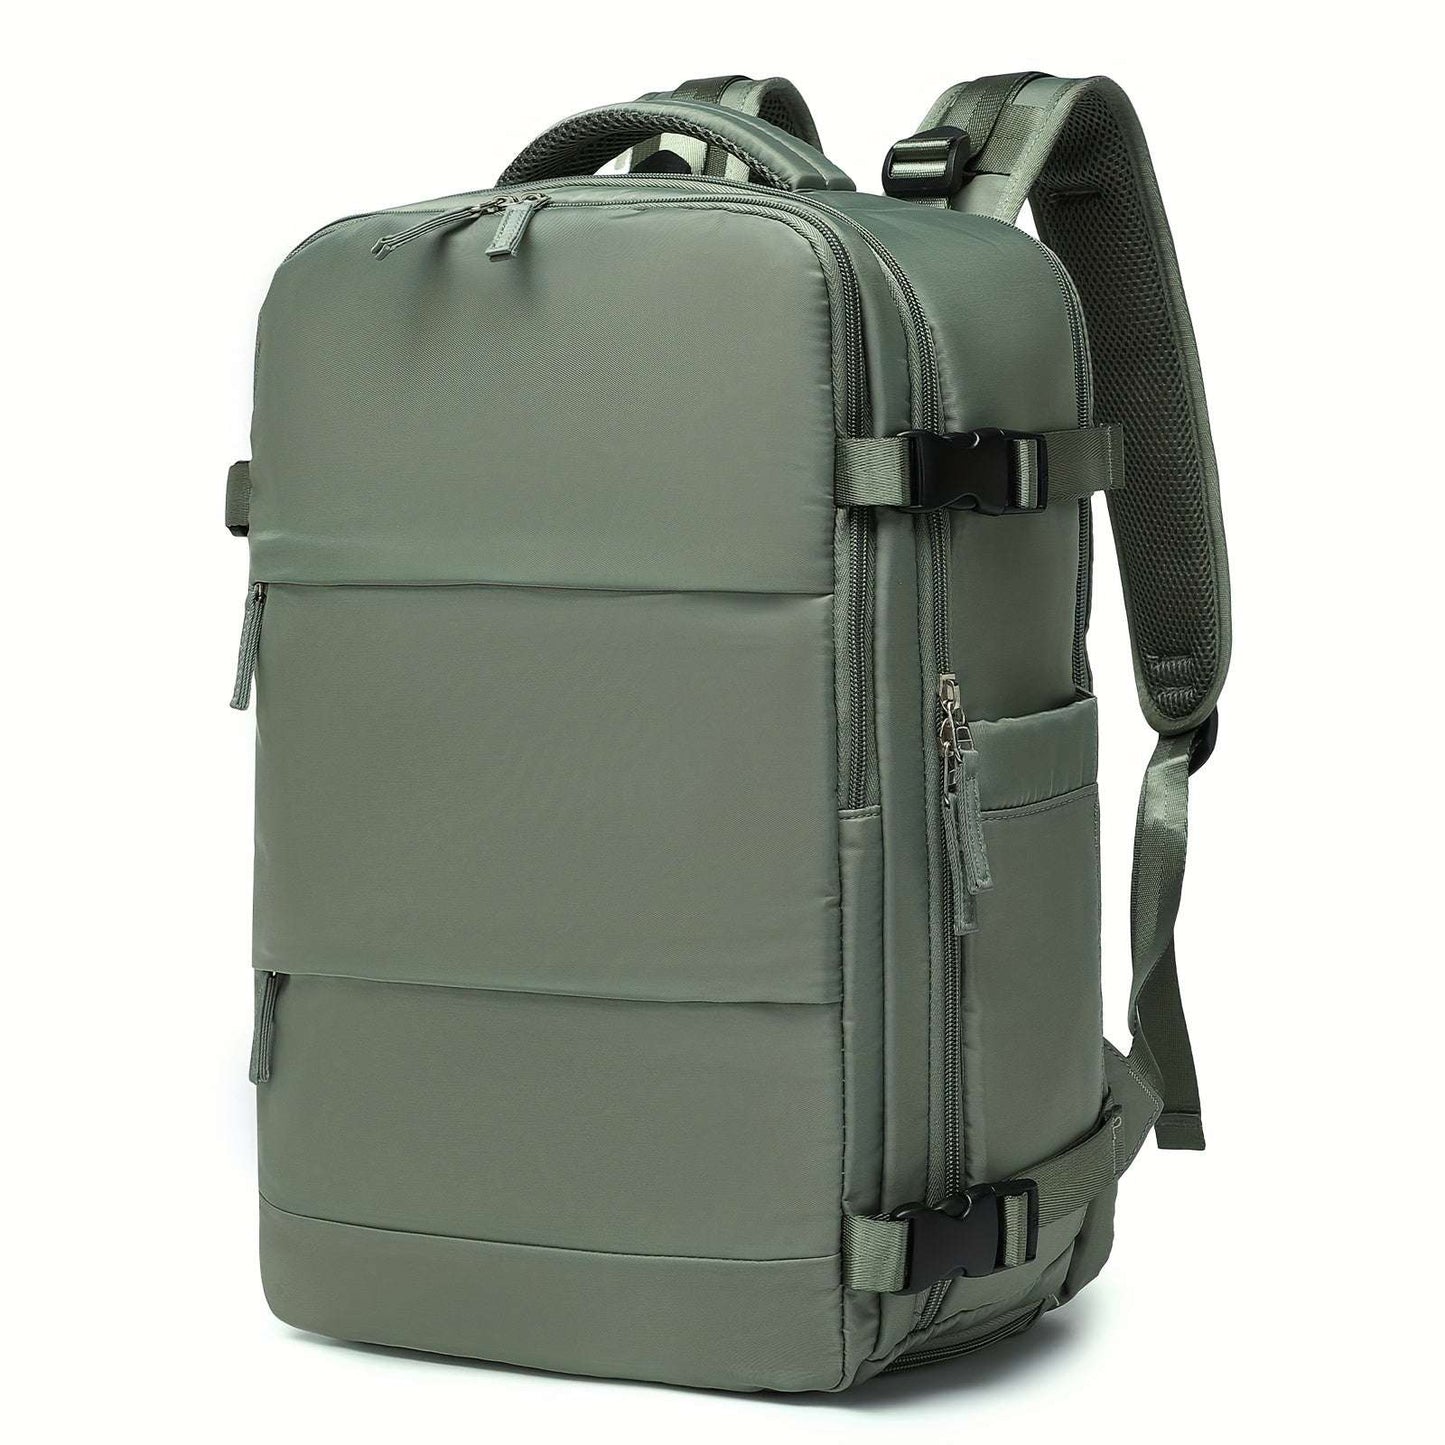 Somago Travel Backpack Anti Theft for 16 Inch Laptop, with Shoe Compartment, USB Charger Port, Army Green 52 Backpack Somago OK•PhotoFineArt